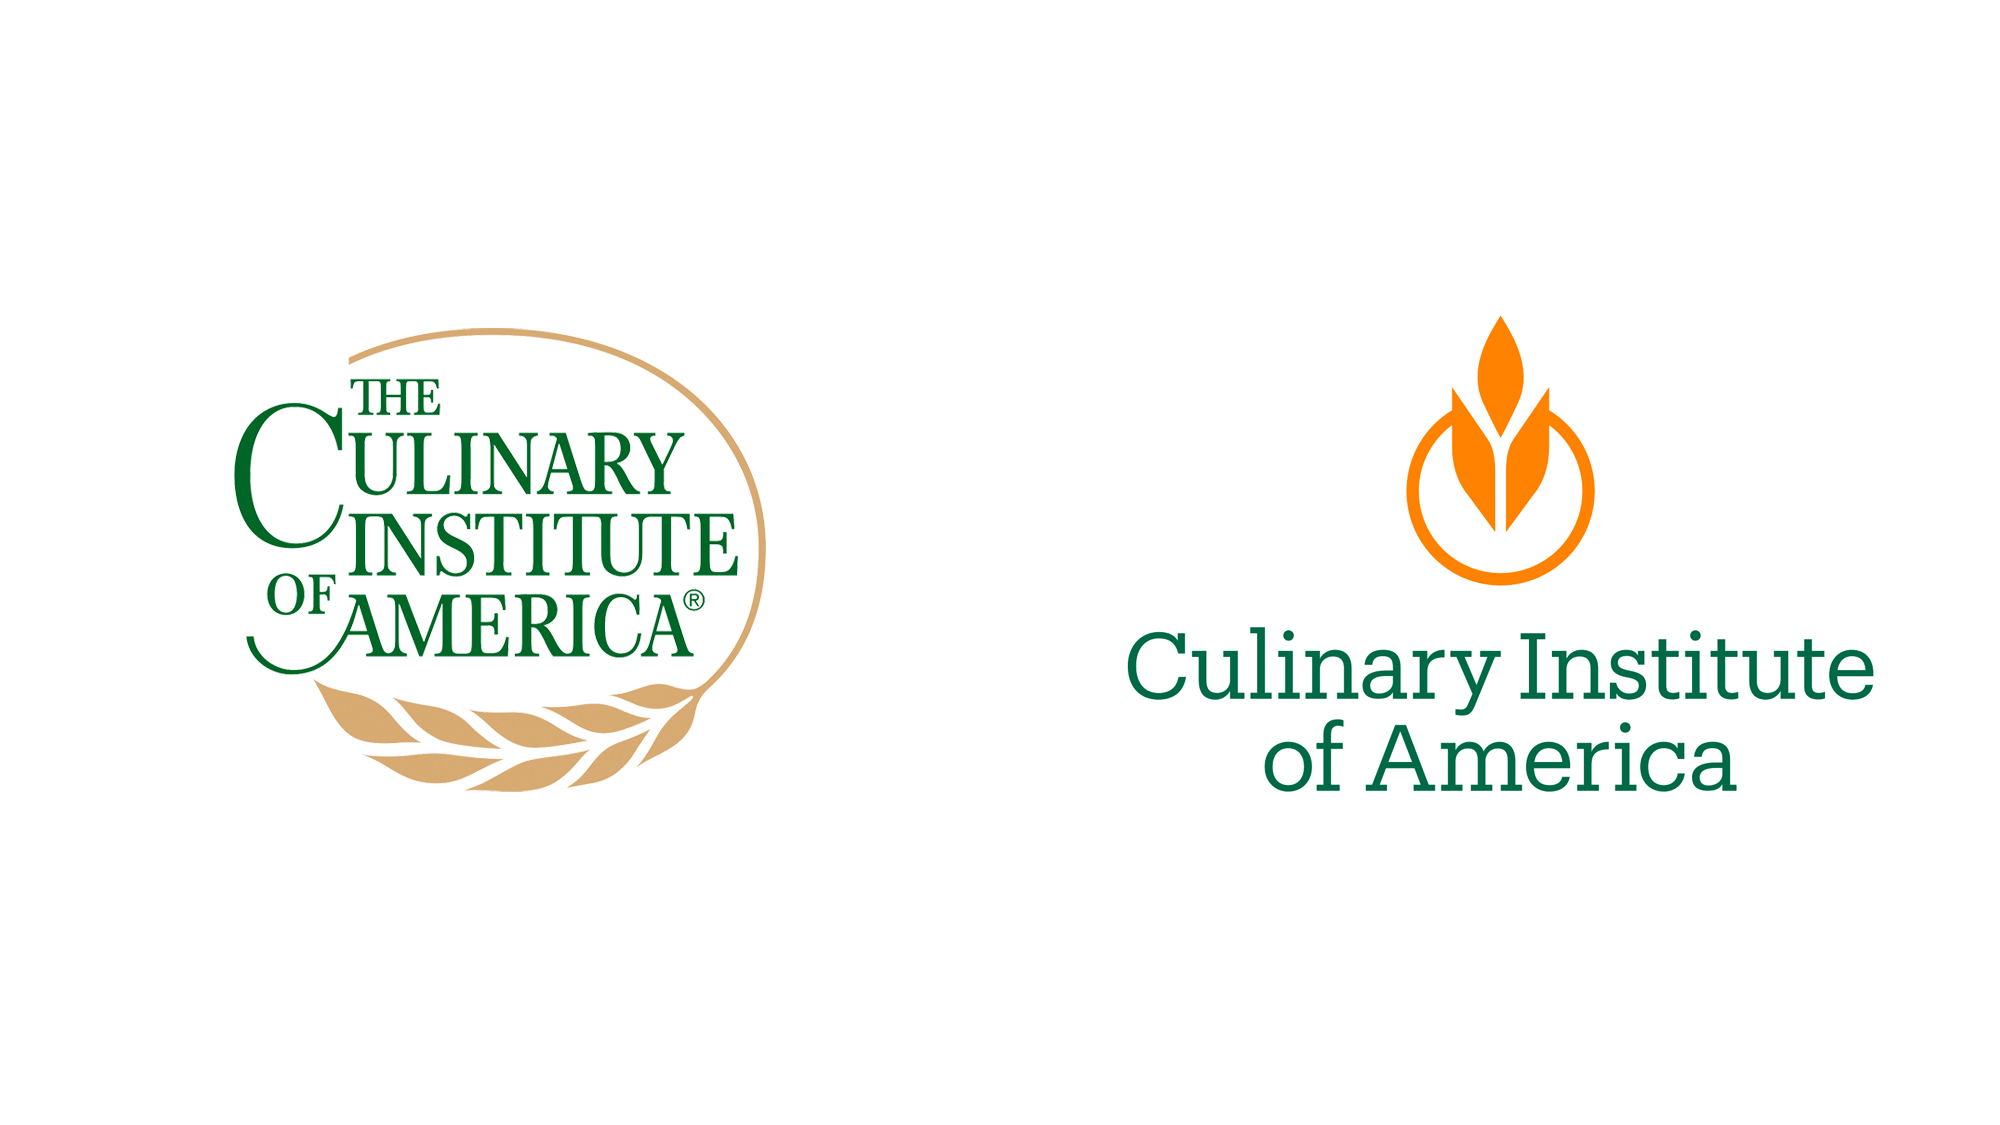 brand-new-new-logo-for-the-culinary-institute-of-america-by-chermayeff